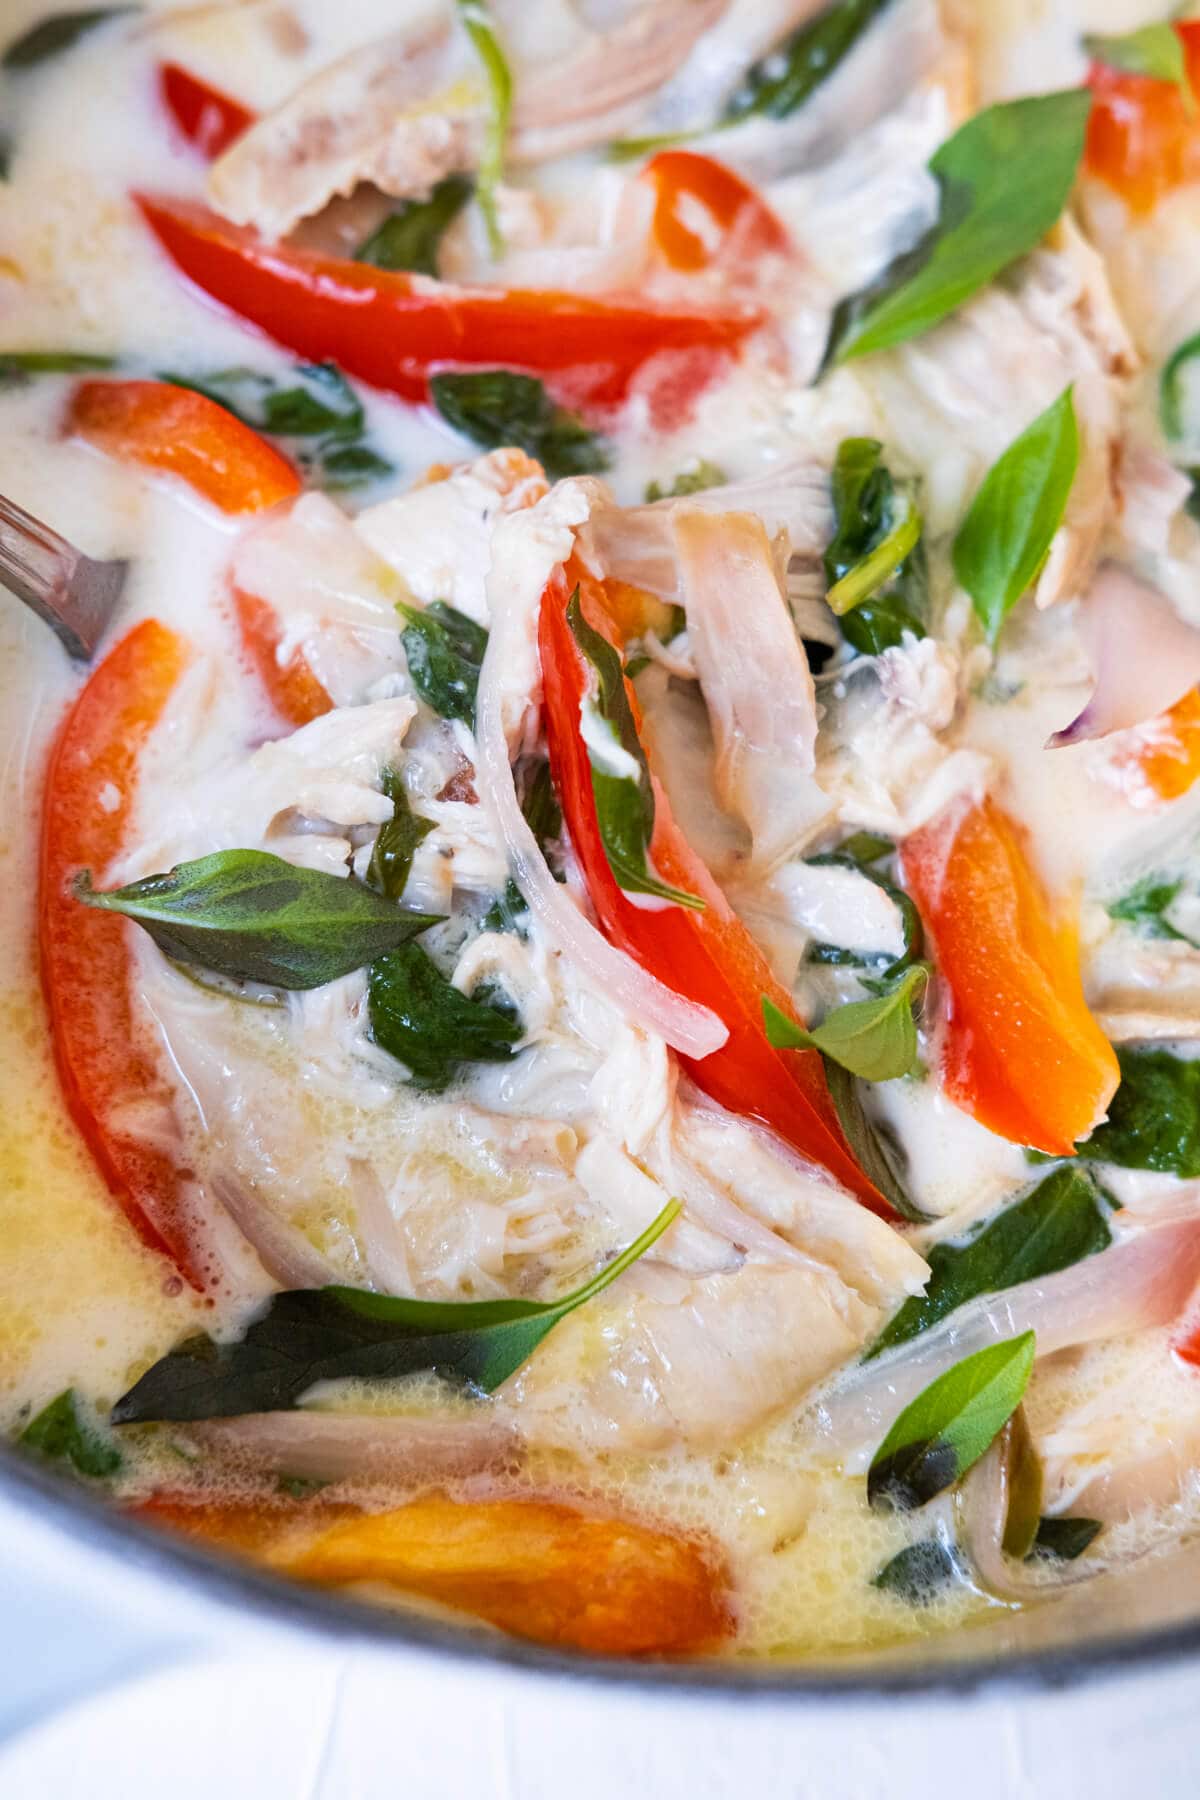 Shredded chicken, red bell pepper, and fresh basil leaves in rich spicy coconut chicken stew. 